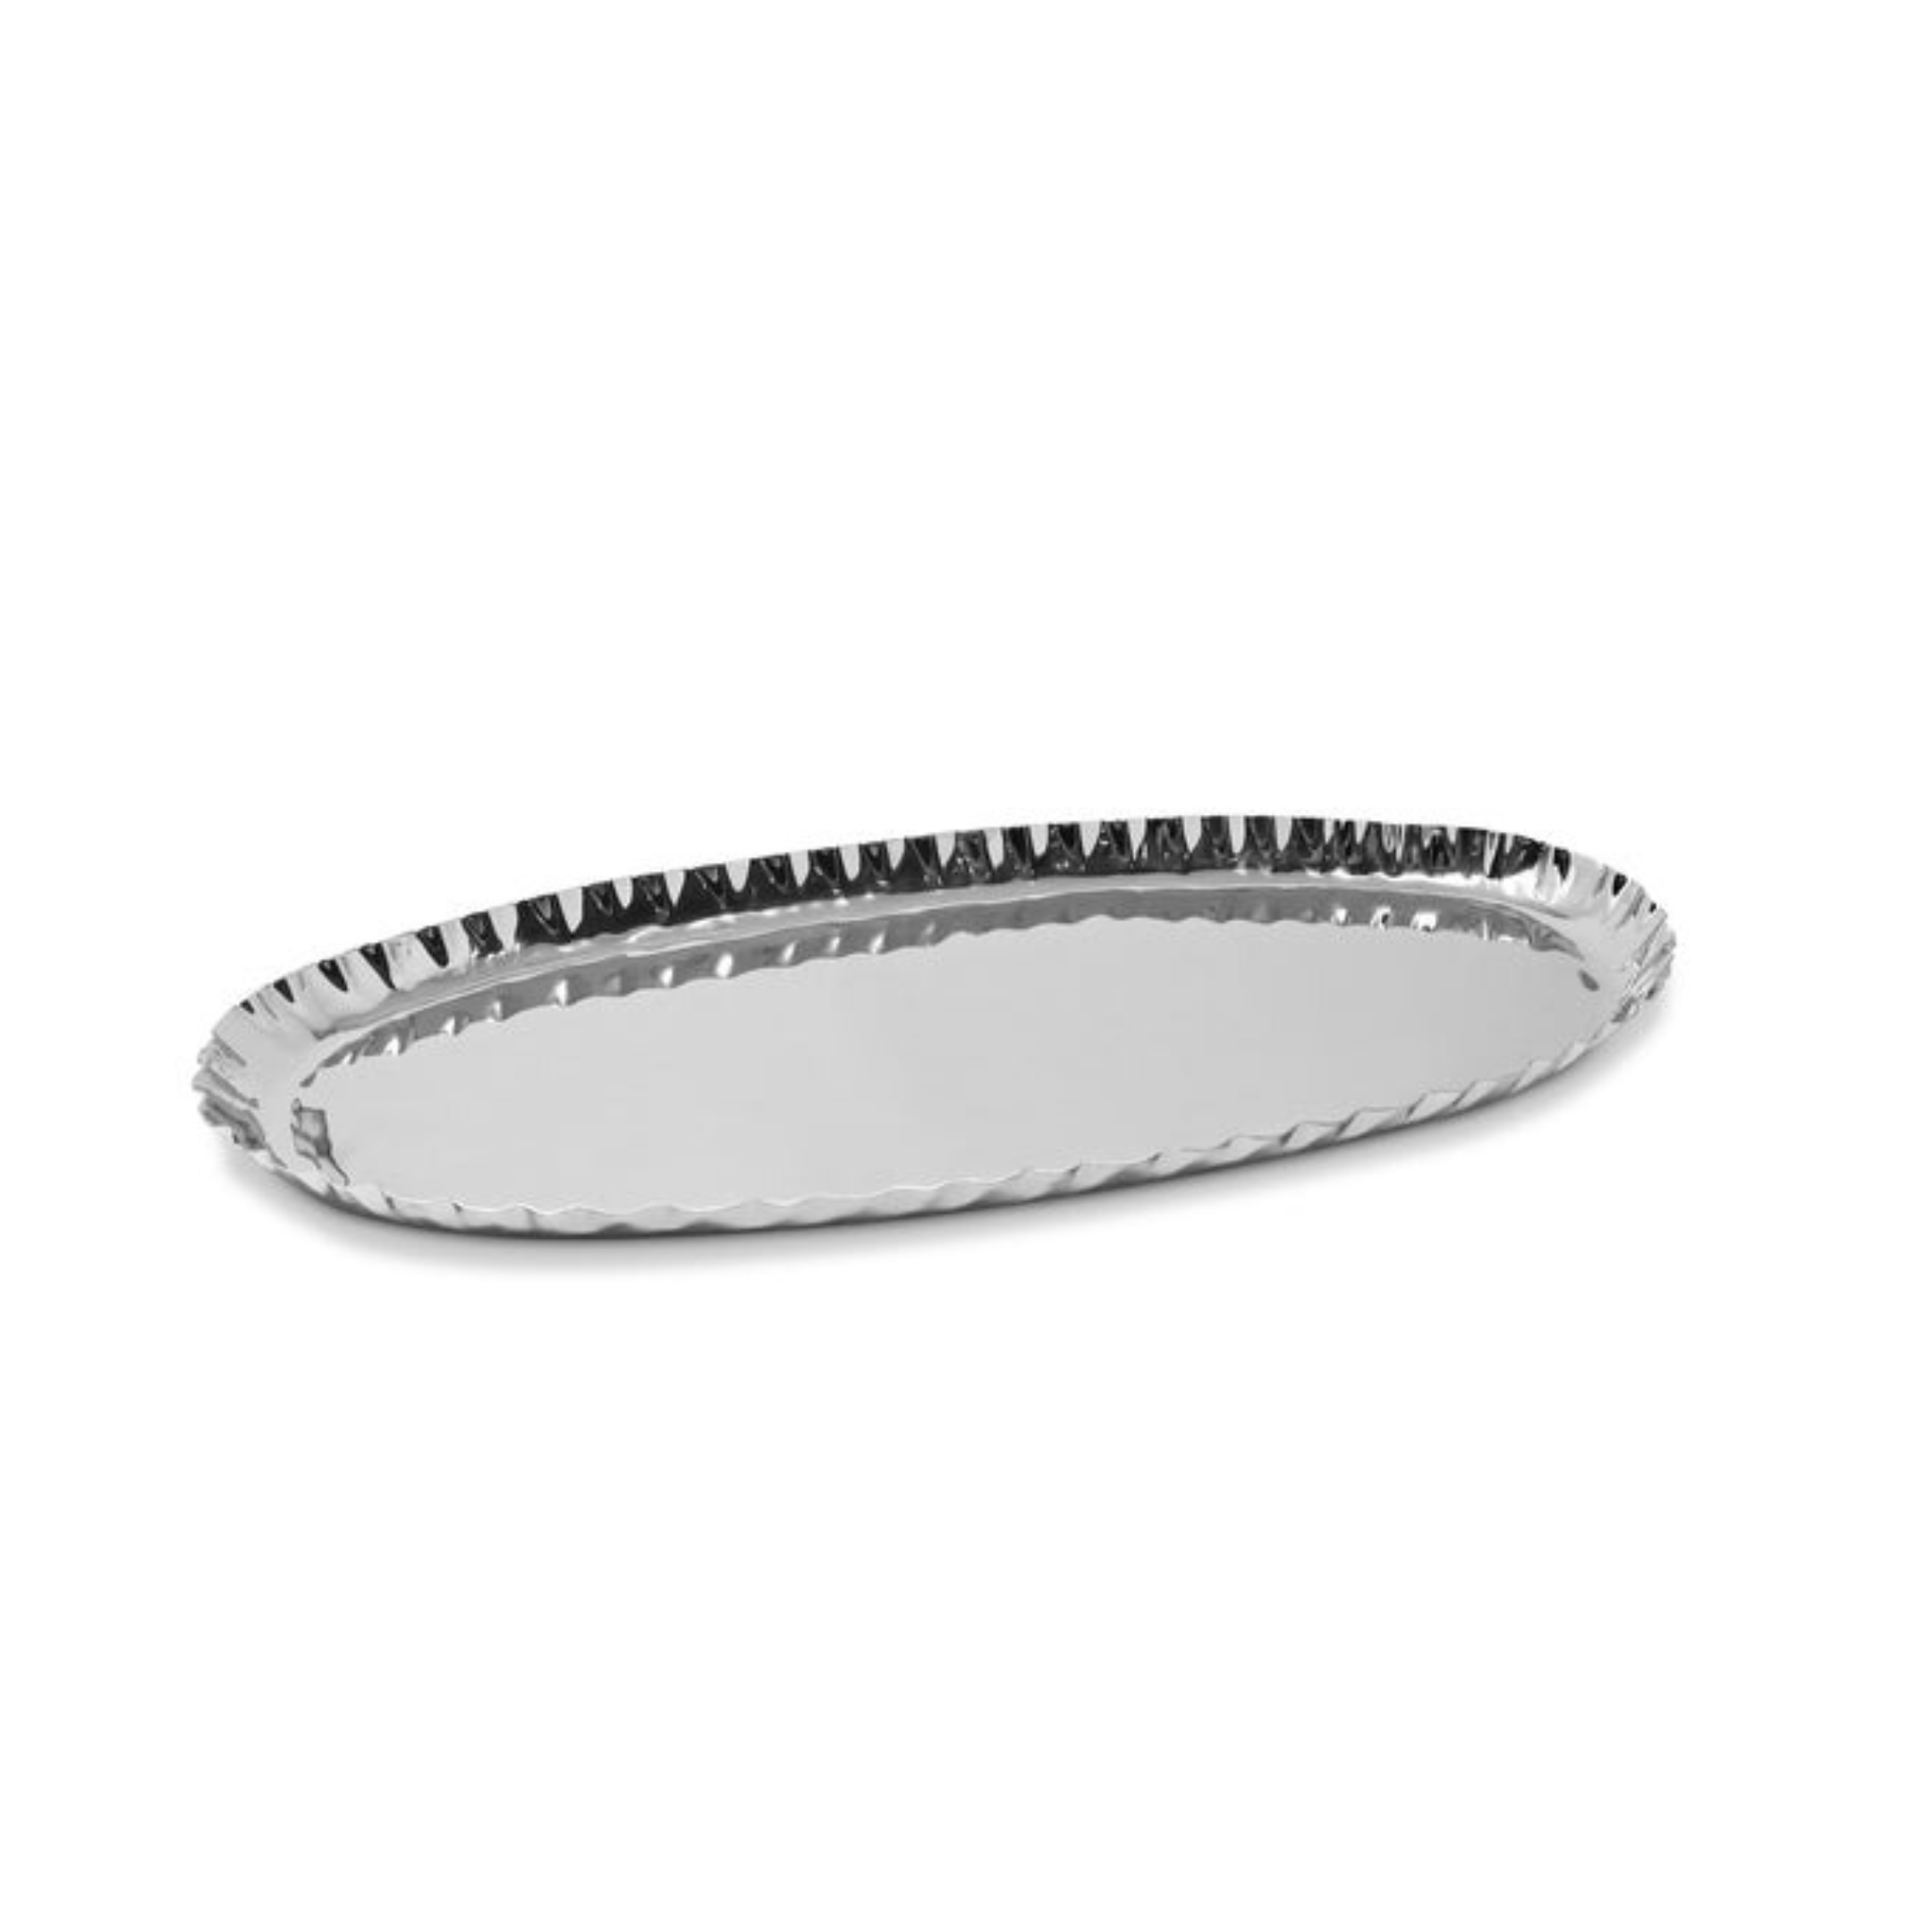 Silver Stainless Steel Platter with Dried Fruit